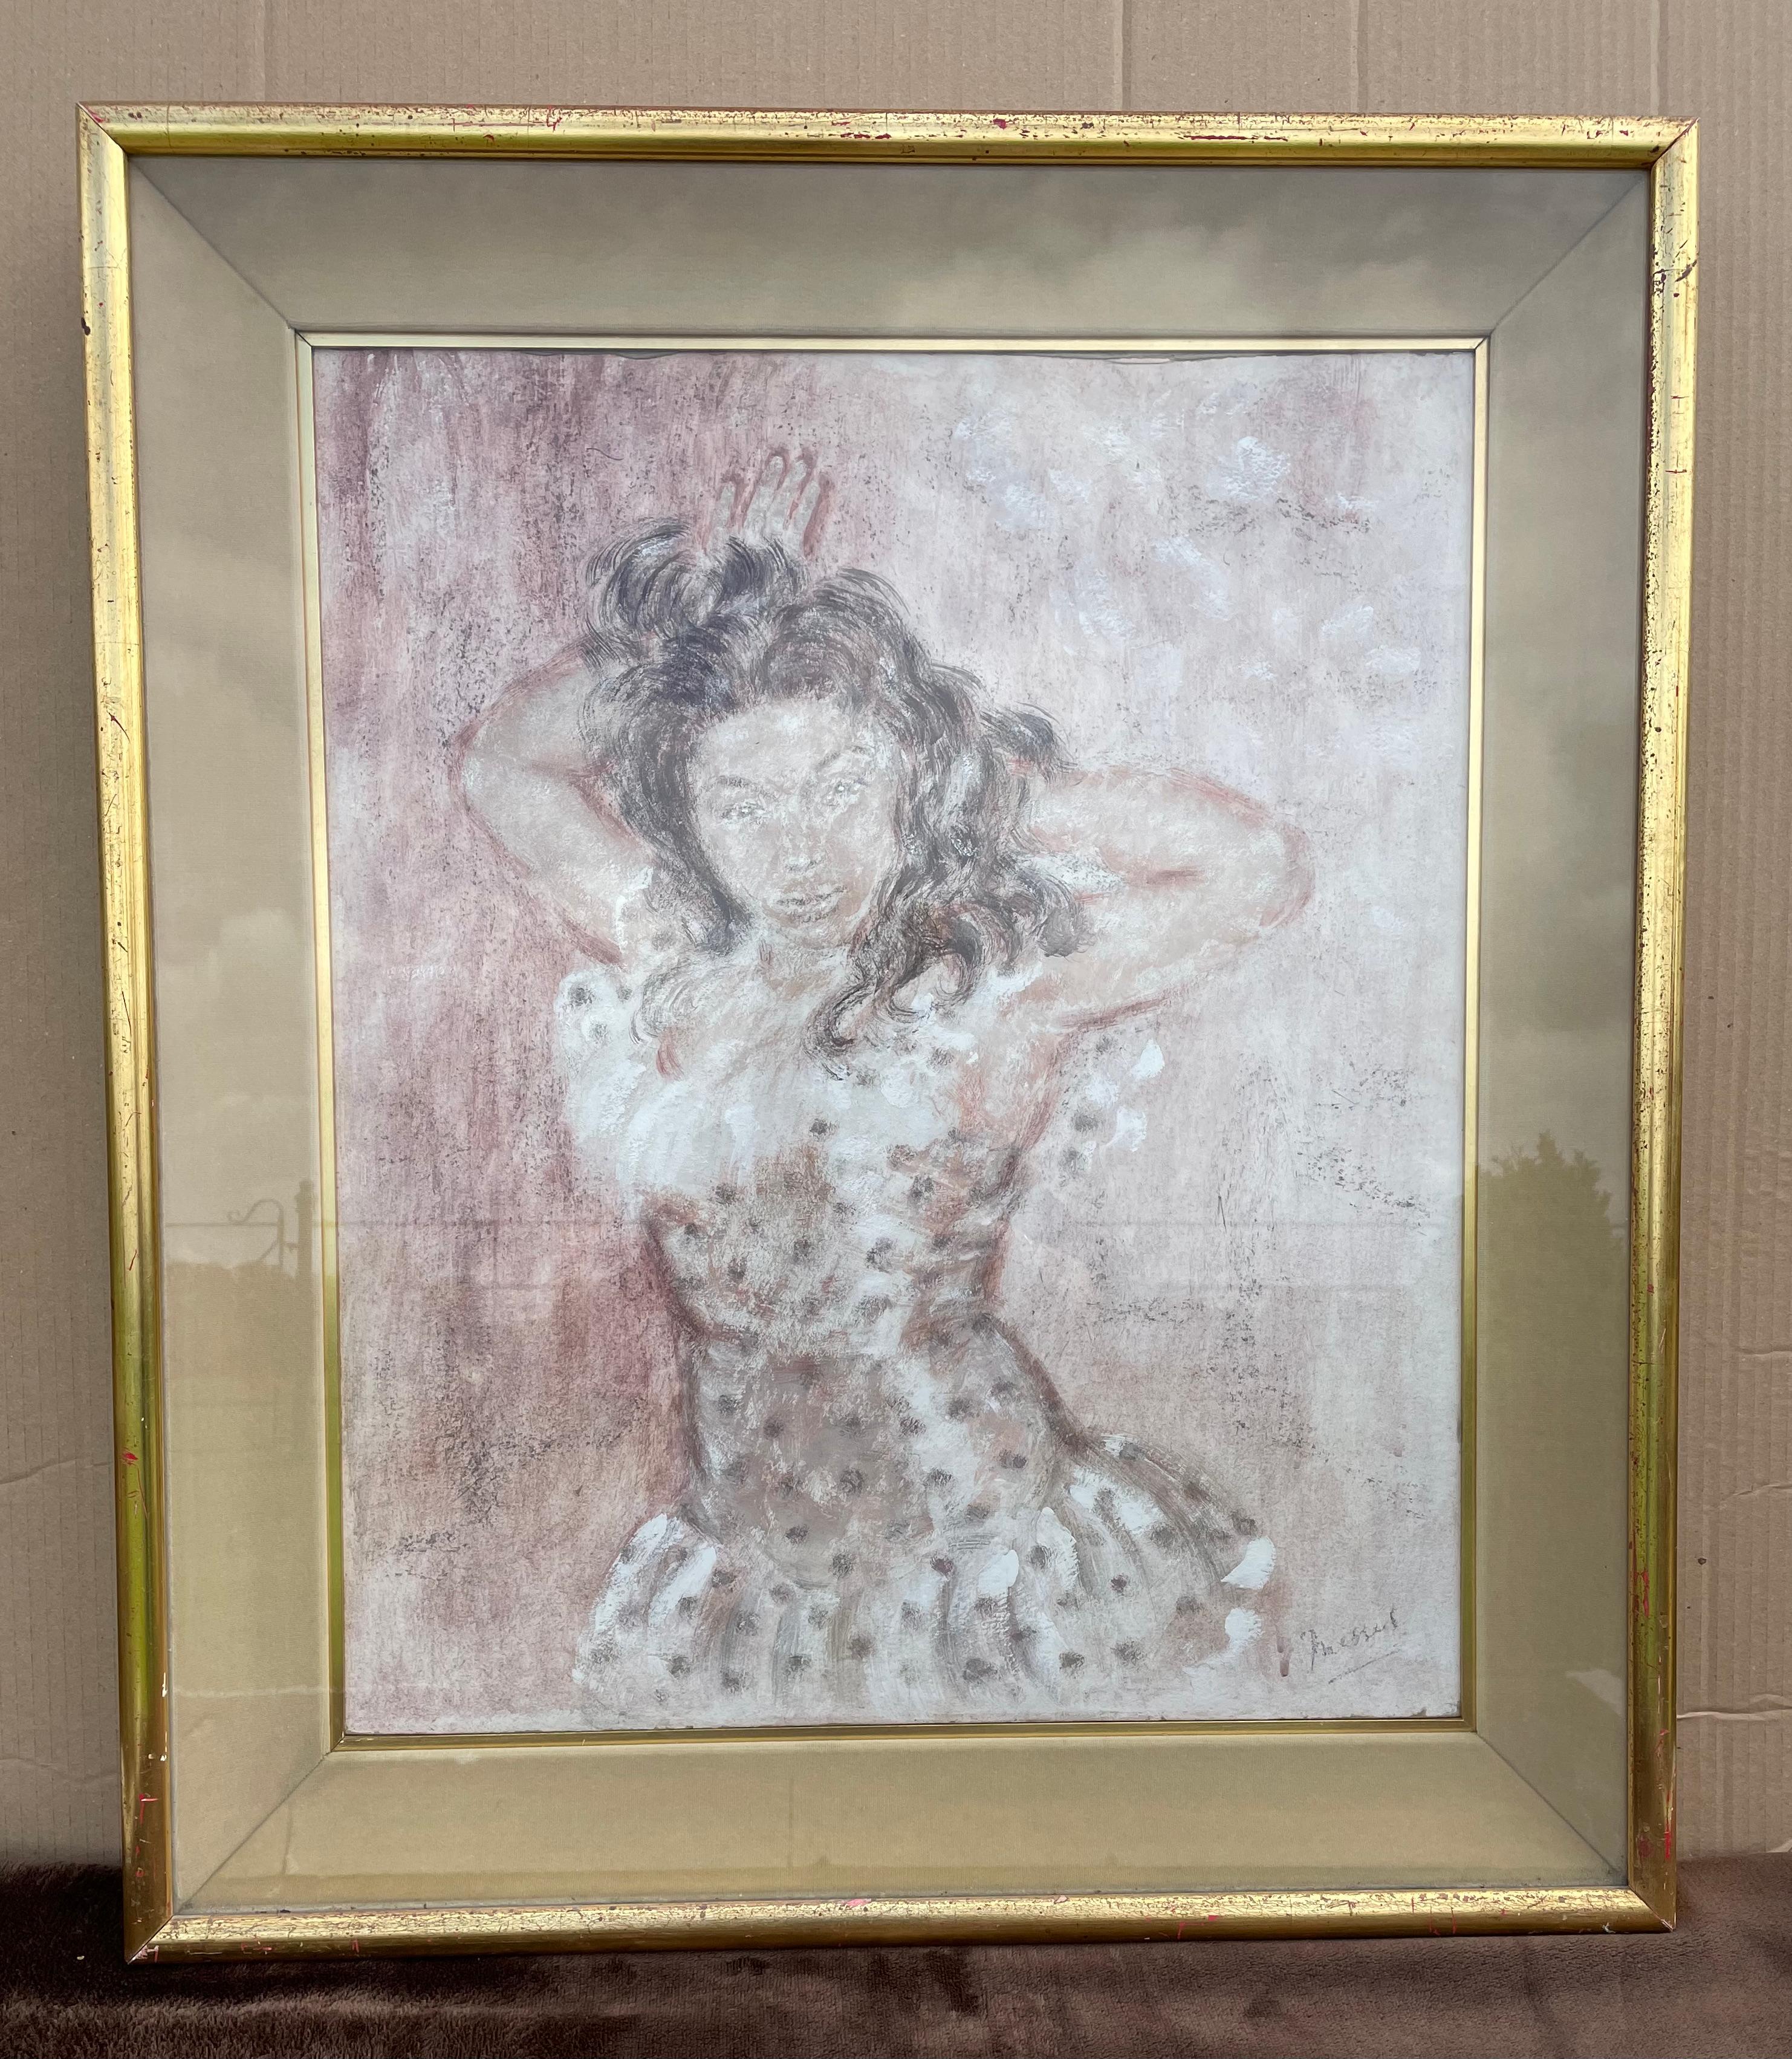 OLIVER MESSEL
(1904-1978)

Dancer

Signed l.r.: Oliver Messel 
Oil and watercolour on paper
Framed

60 by 50 in., 23 ½  by 19 ¾ cm.
(Frame size 76.5 by 66.5 in., 30 by 26 ¼ cm.)

Born in London, Messel was the grandson of the illustrator Linley